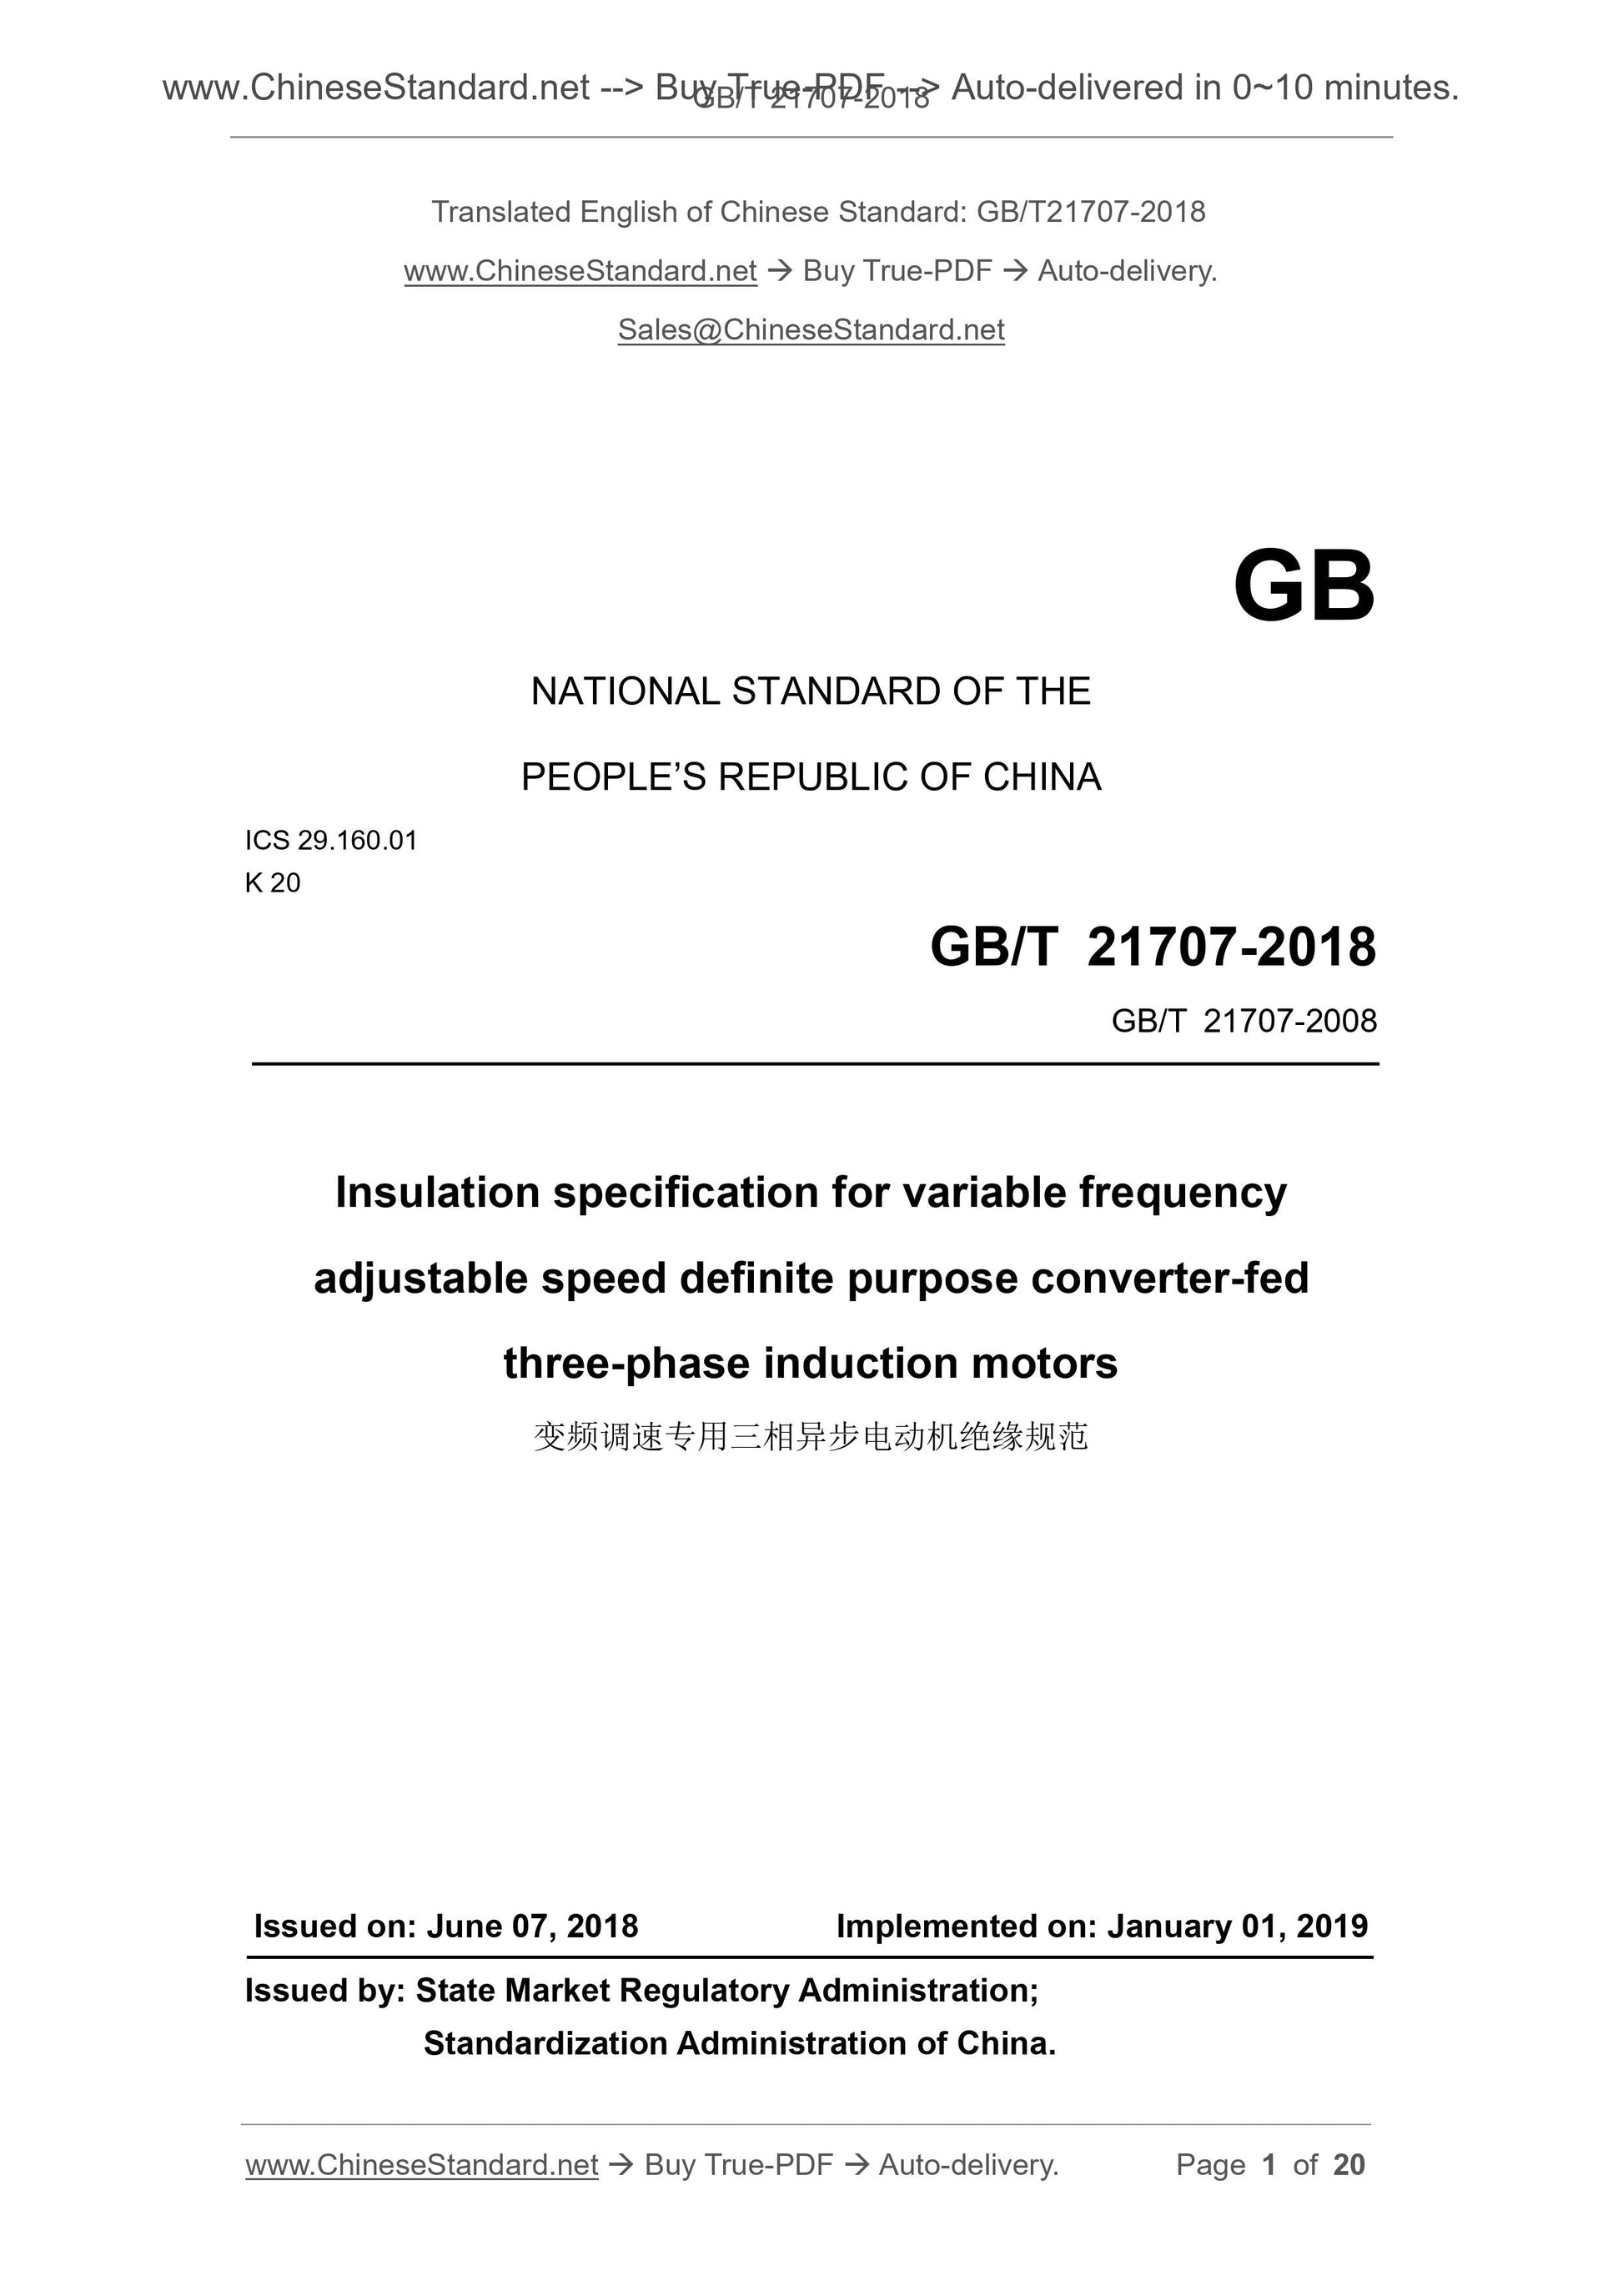 GB/T 21707-2018 Page 1